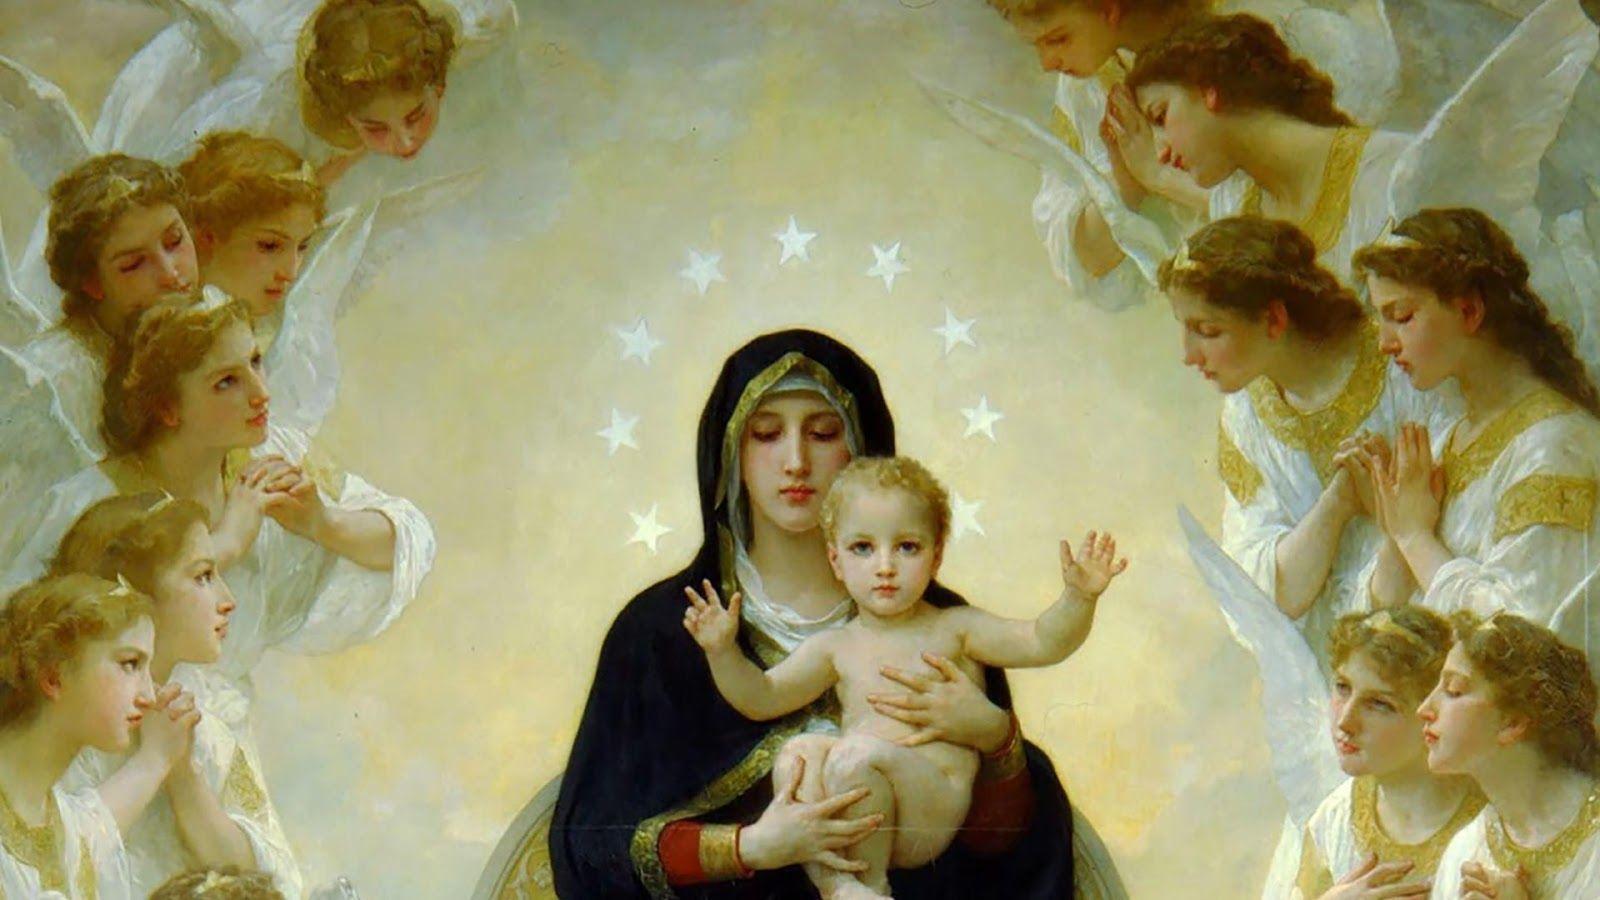 Virgin Mary Live Wallpaper Apps on Google Play